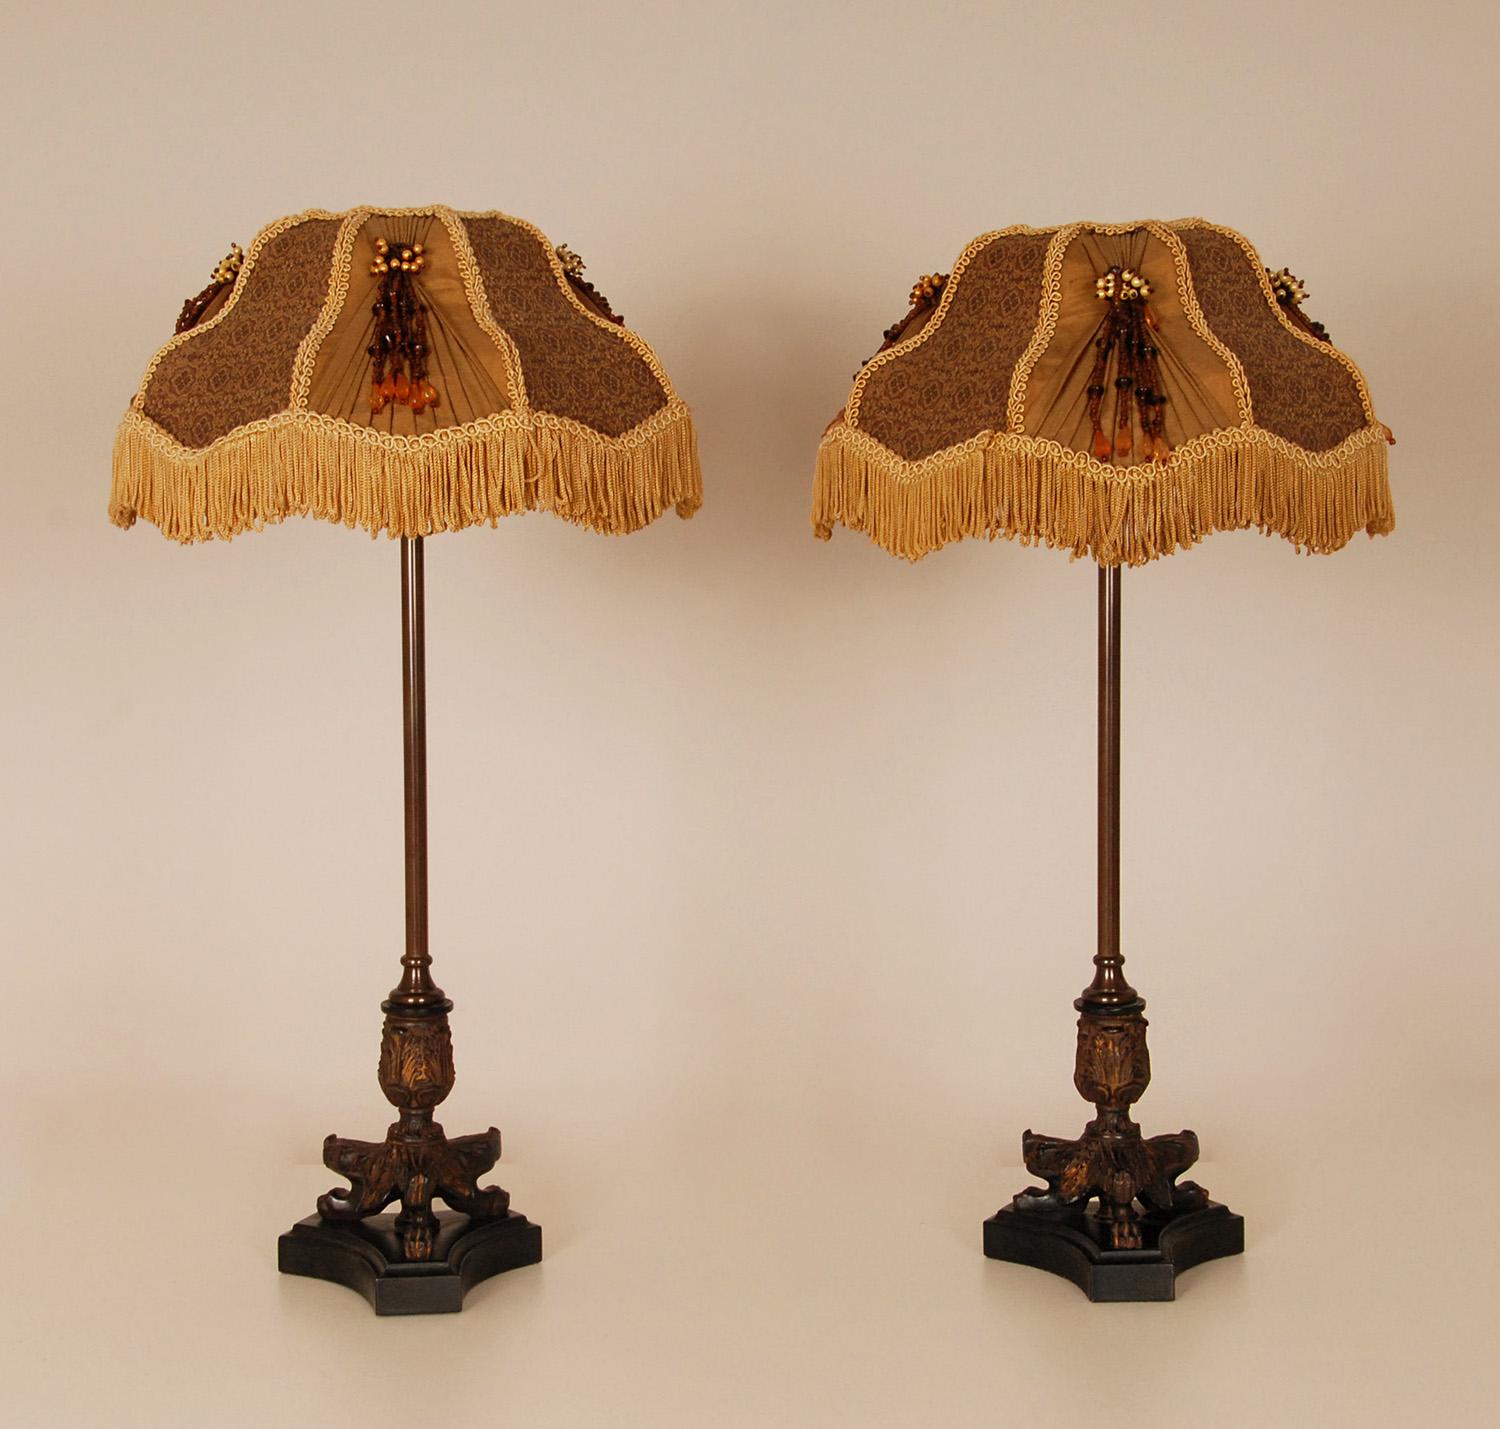 Vintage French Napoleonic Table Lamps Tripod Base Lion Paws Empire Lamps a Pair For Sale 3